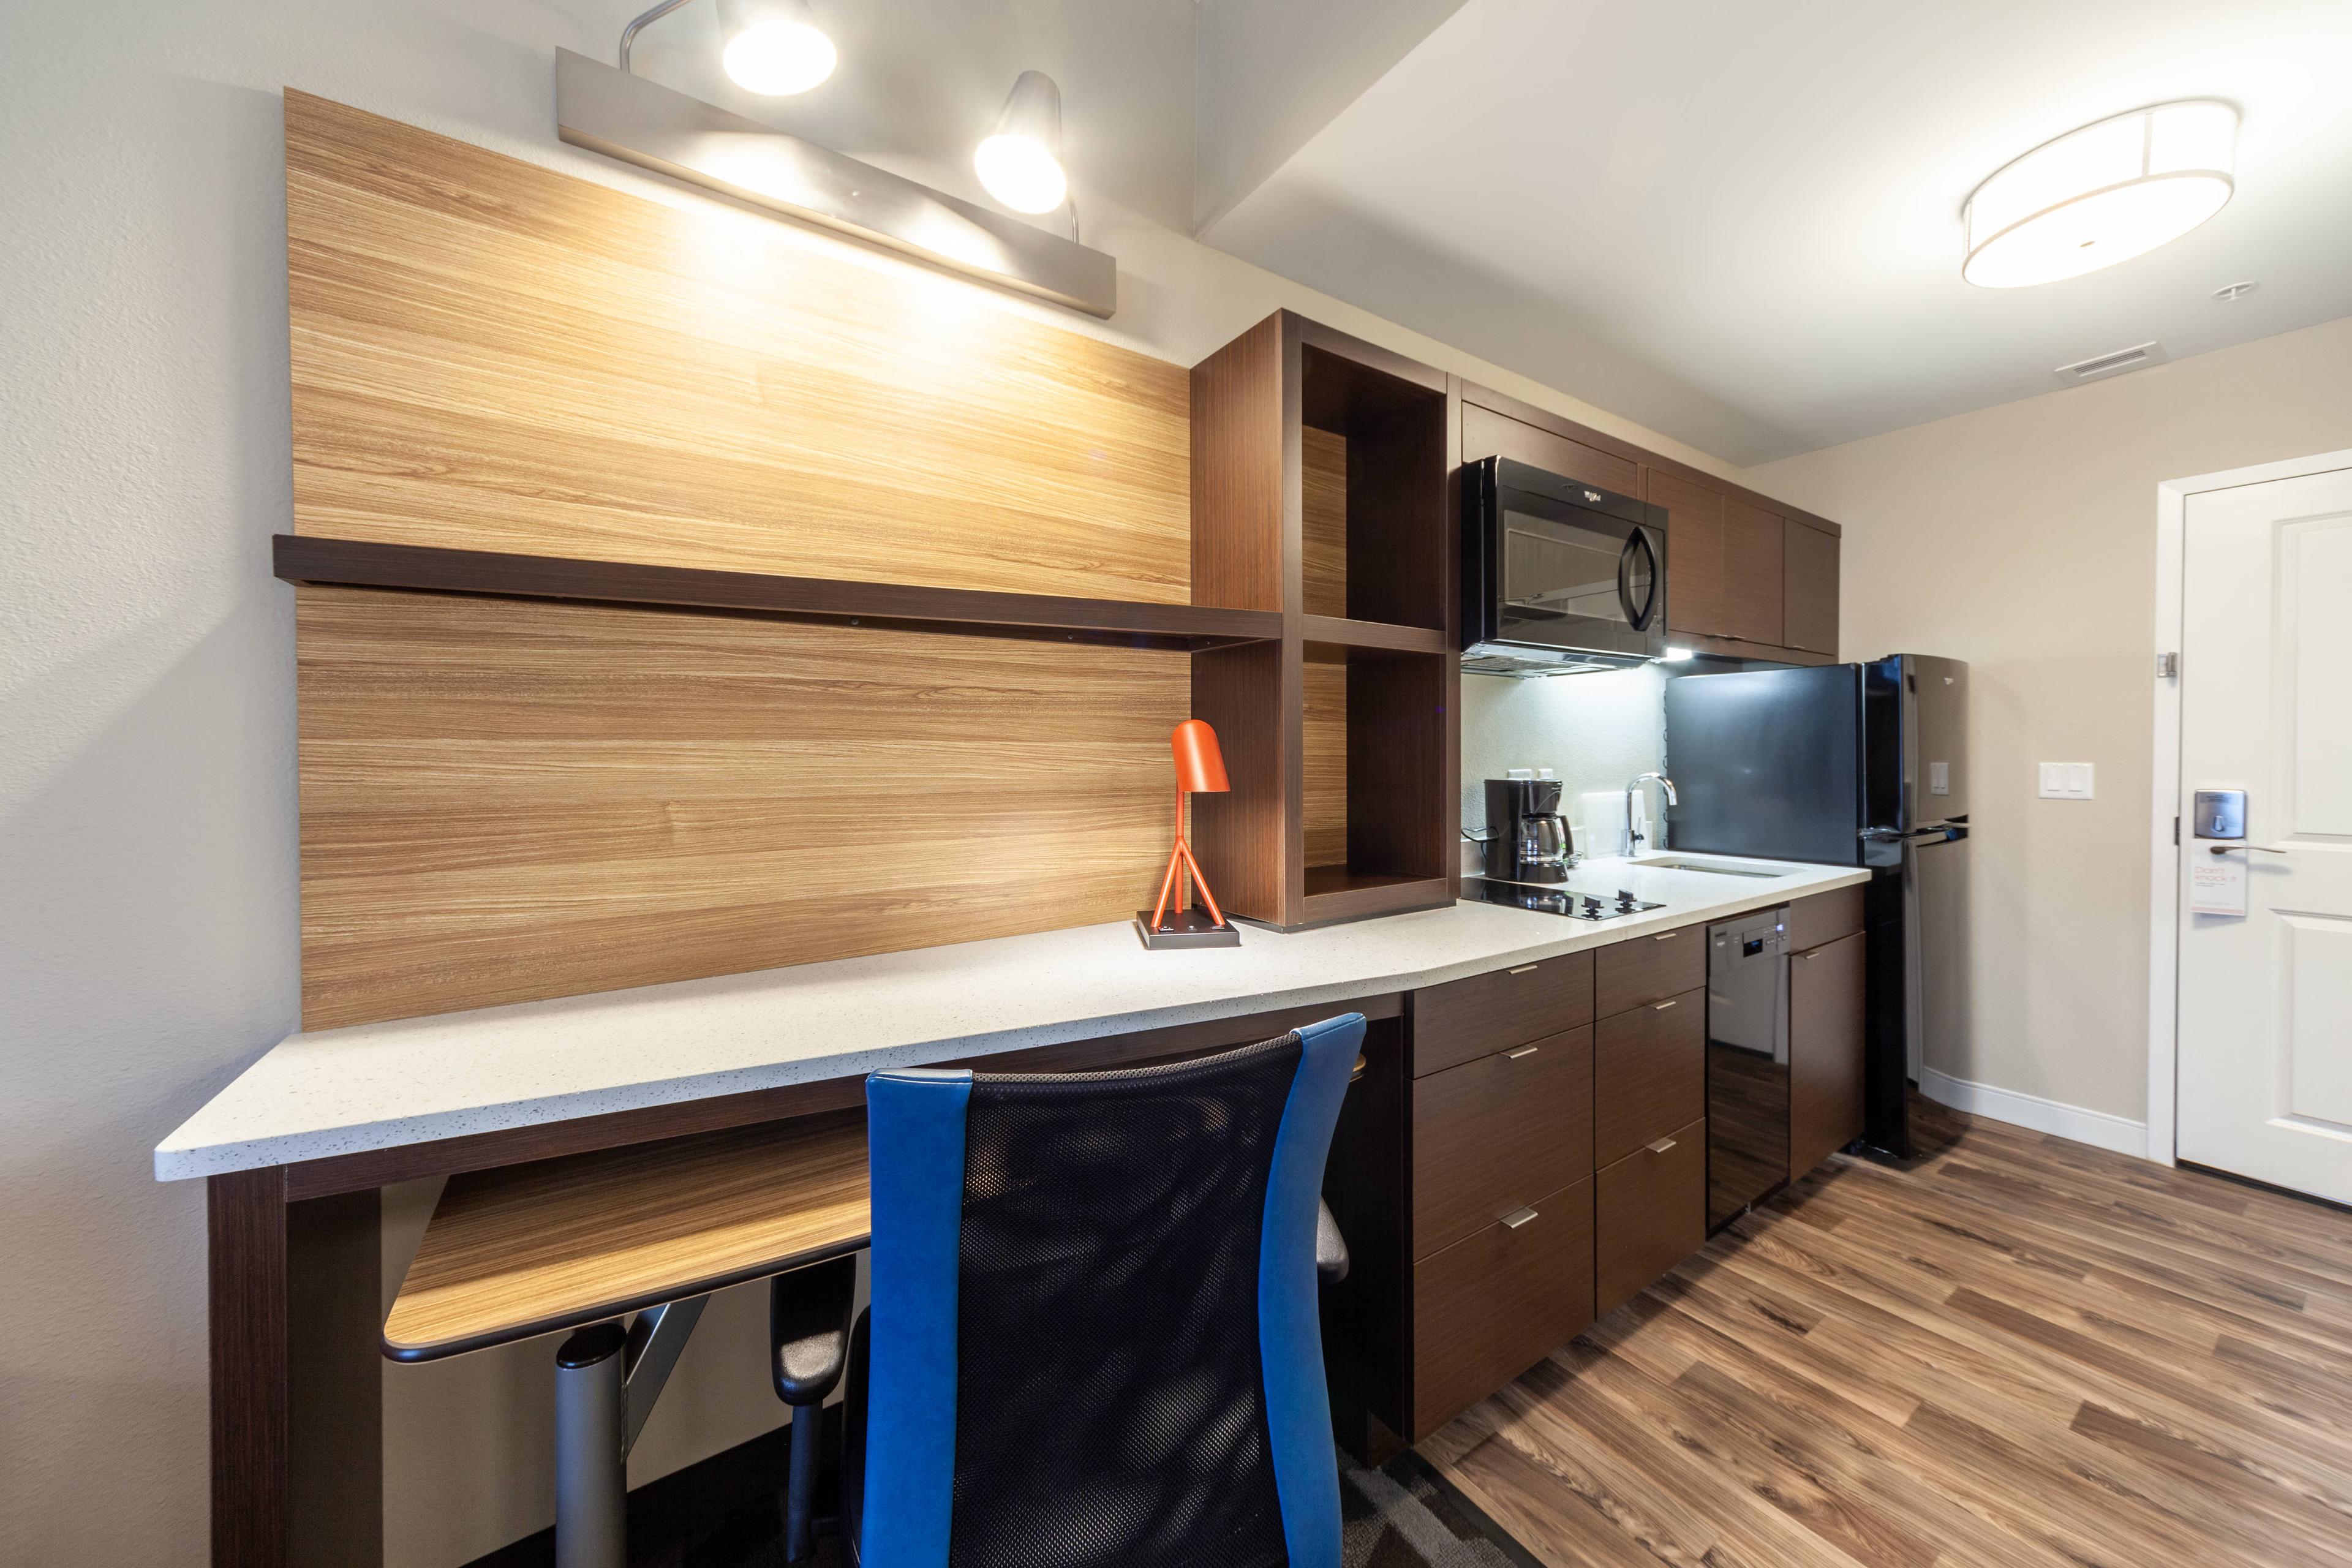 Stay connected and productive in our home office suite with extra storage, free Wi-Fi, data, electrical jacks and a flexible work space.